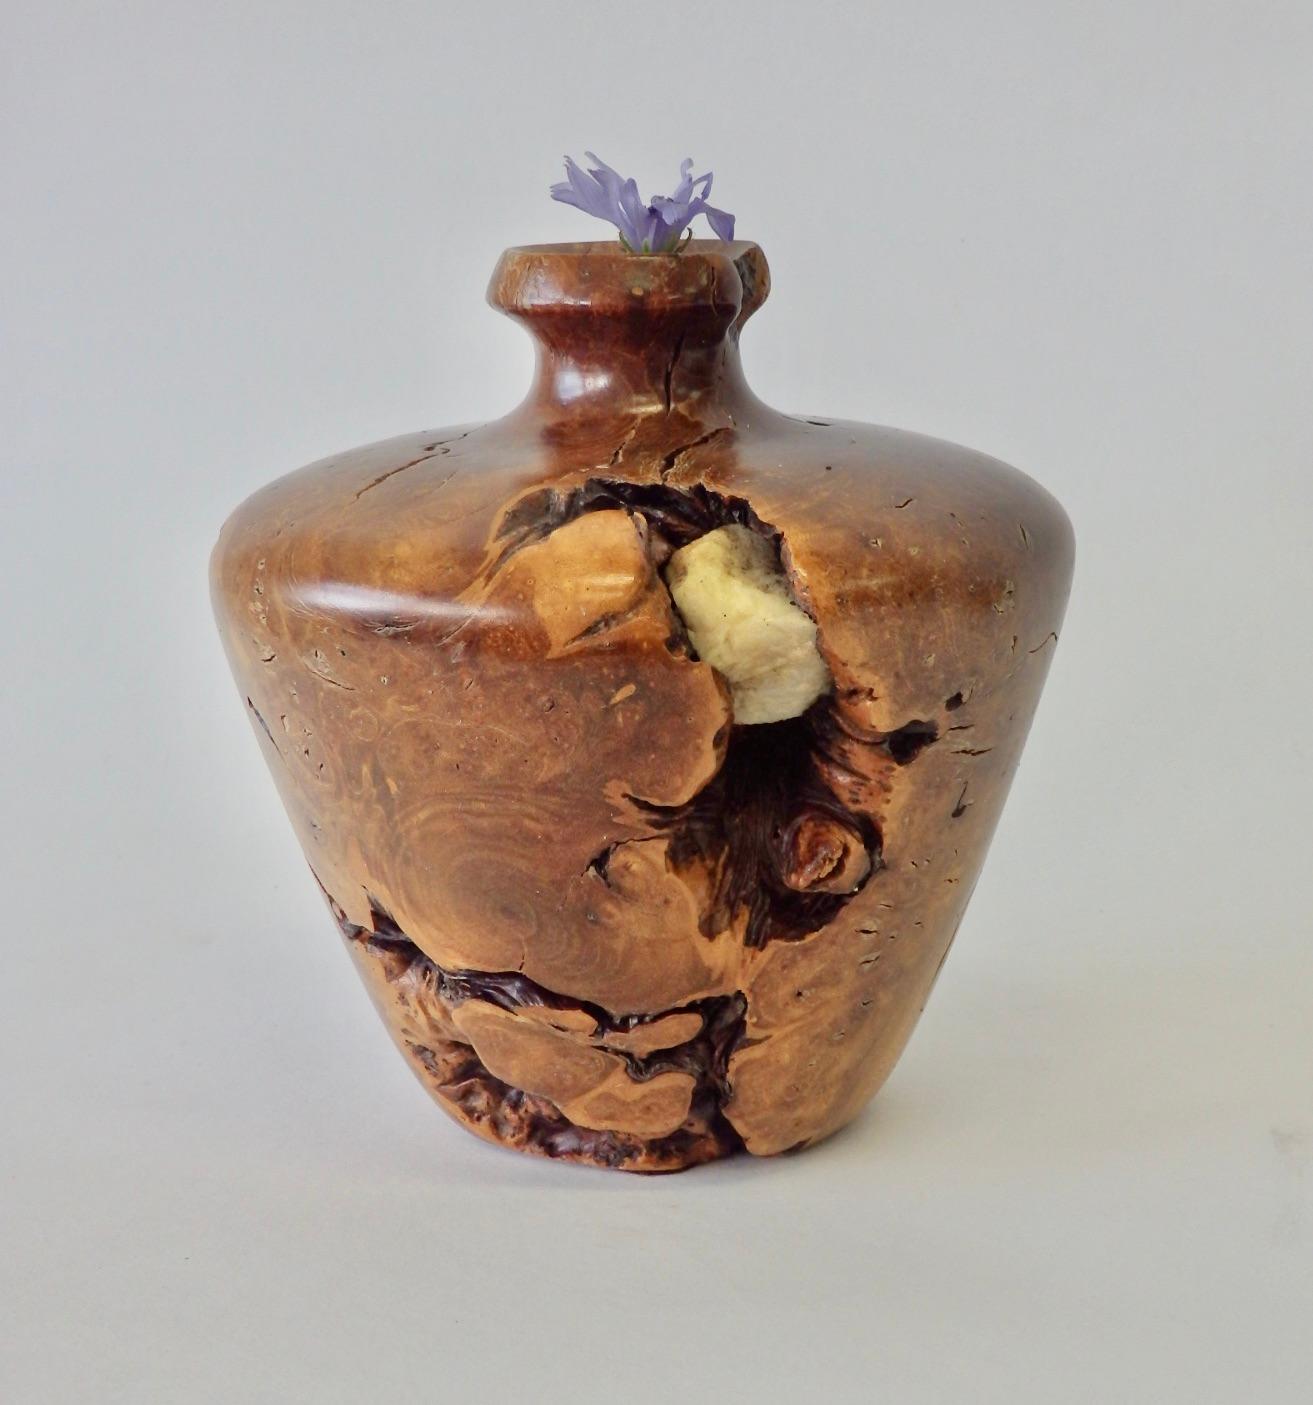 American Craftsman Turned Burl Wood Weed Pot with Quartz Stone Inclusion